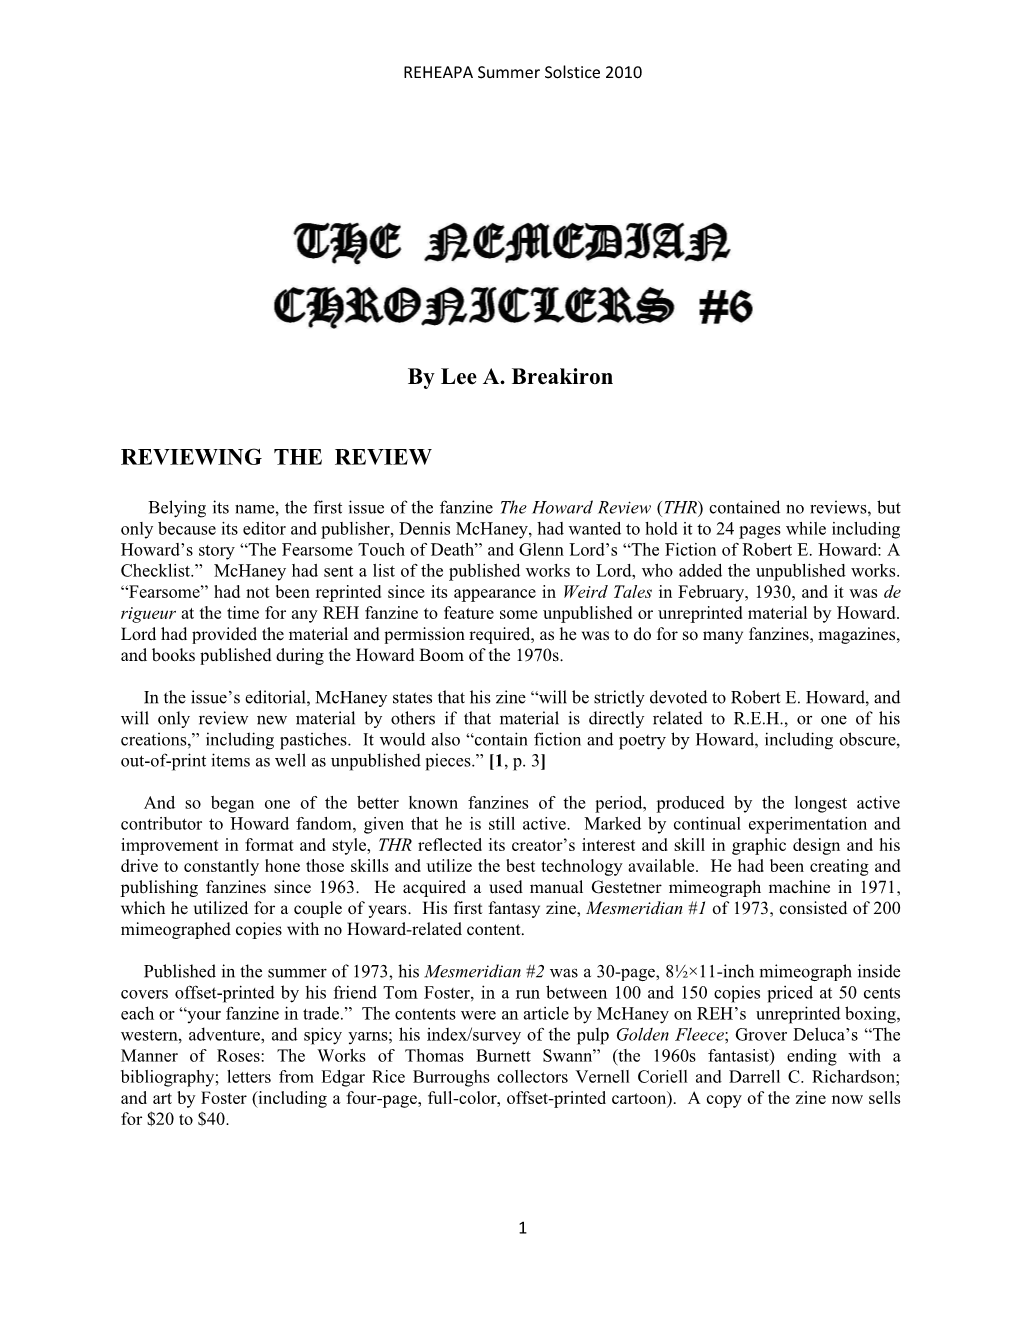 The Nemedian Chroniclers #6